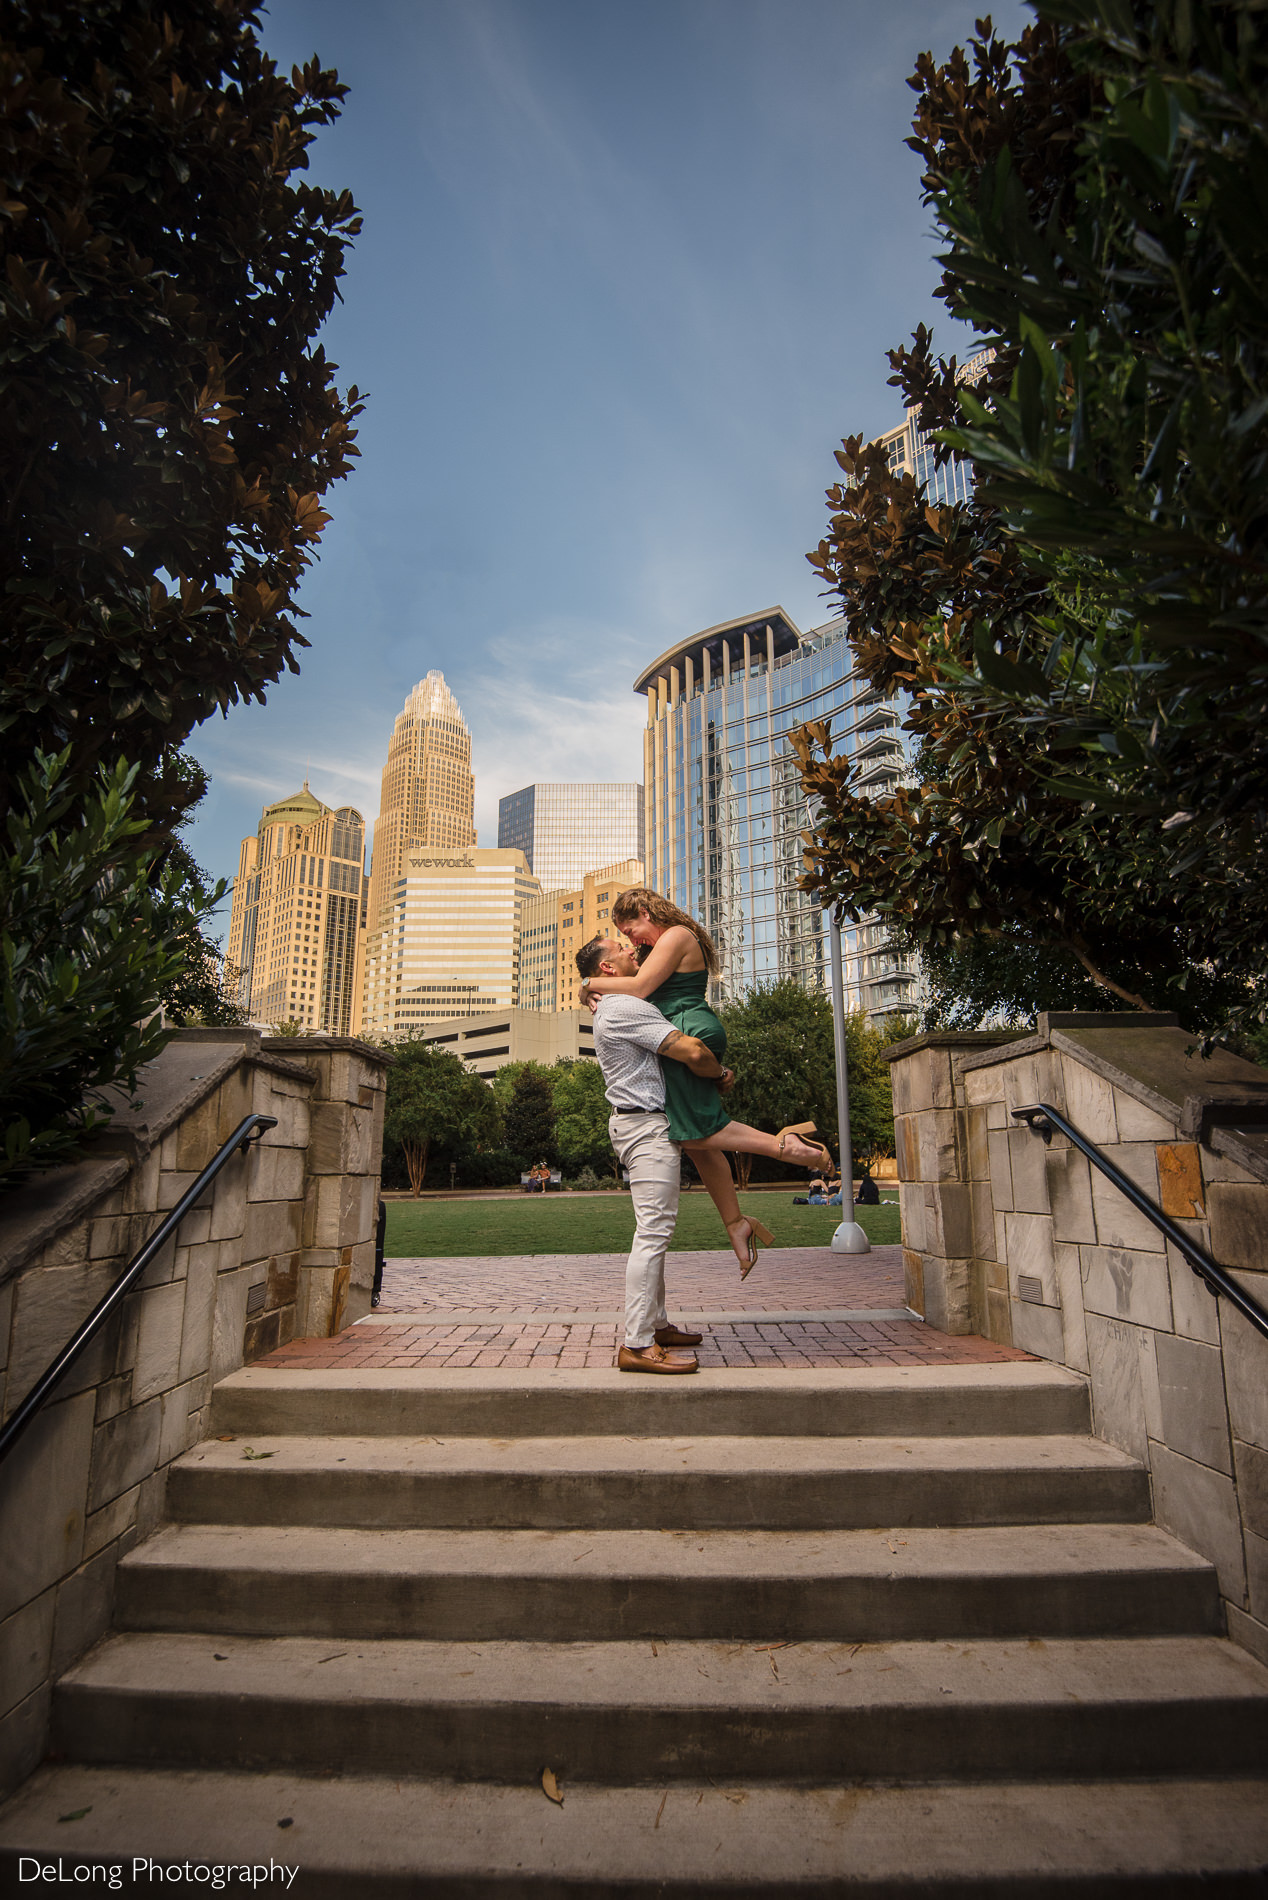 Guy lifting girl up smiling and having fun during a Romare Bearden Park engagement session on a clear blue day with the Charlotte skyline in the background by Charlotte wedding photographers DeLong Photography